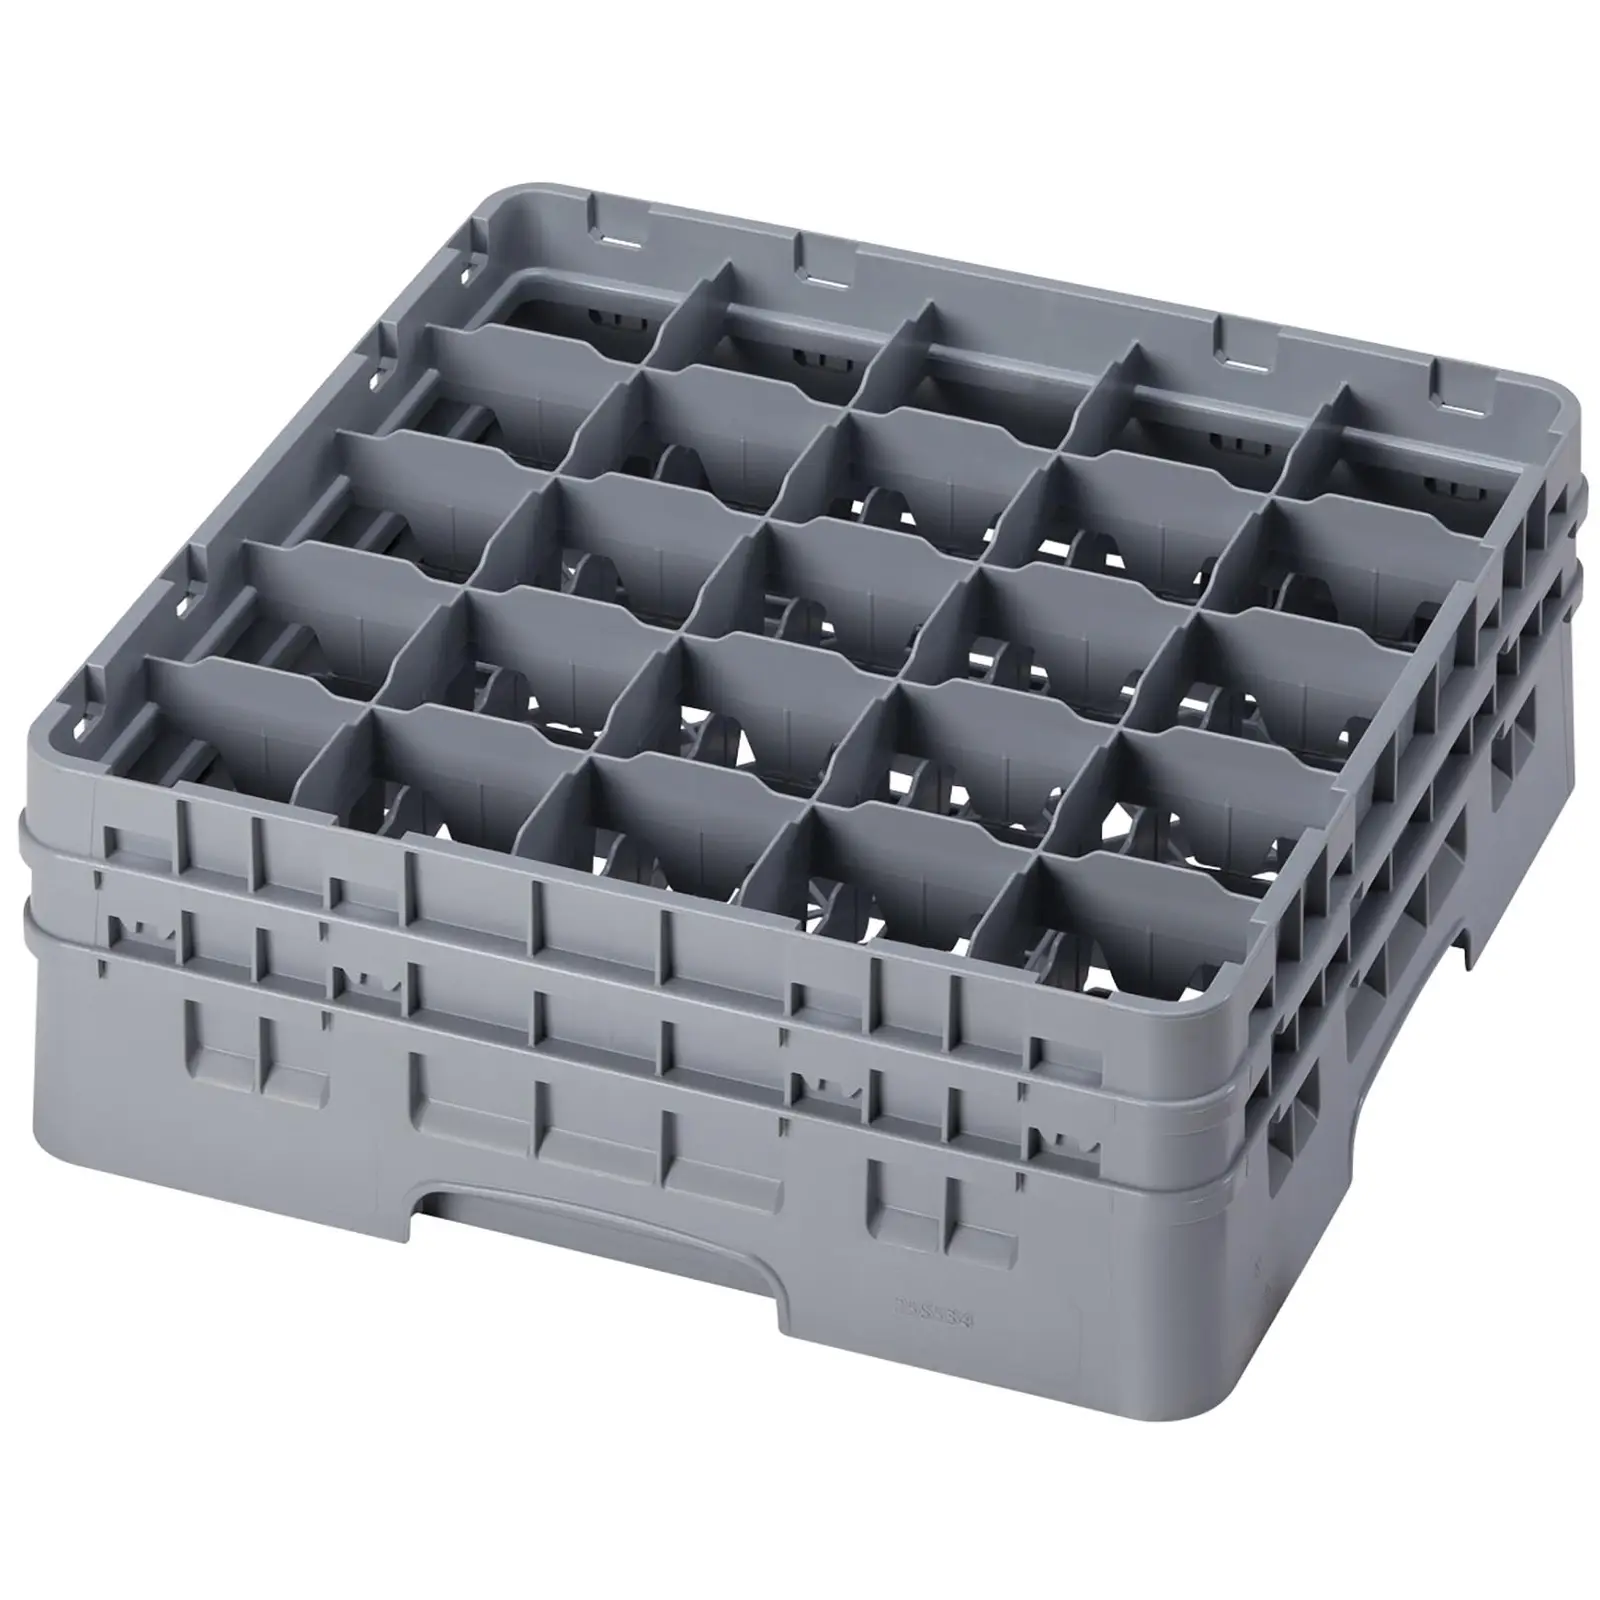 Glass Rack - 25 compartments - 50 x 50 x 18,4 cm - glass height: 13,3 cm